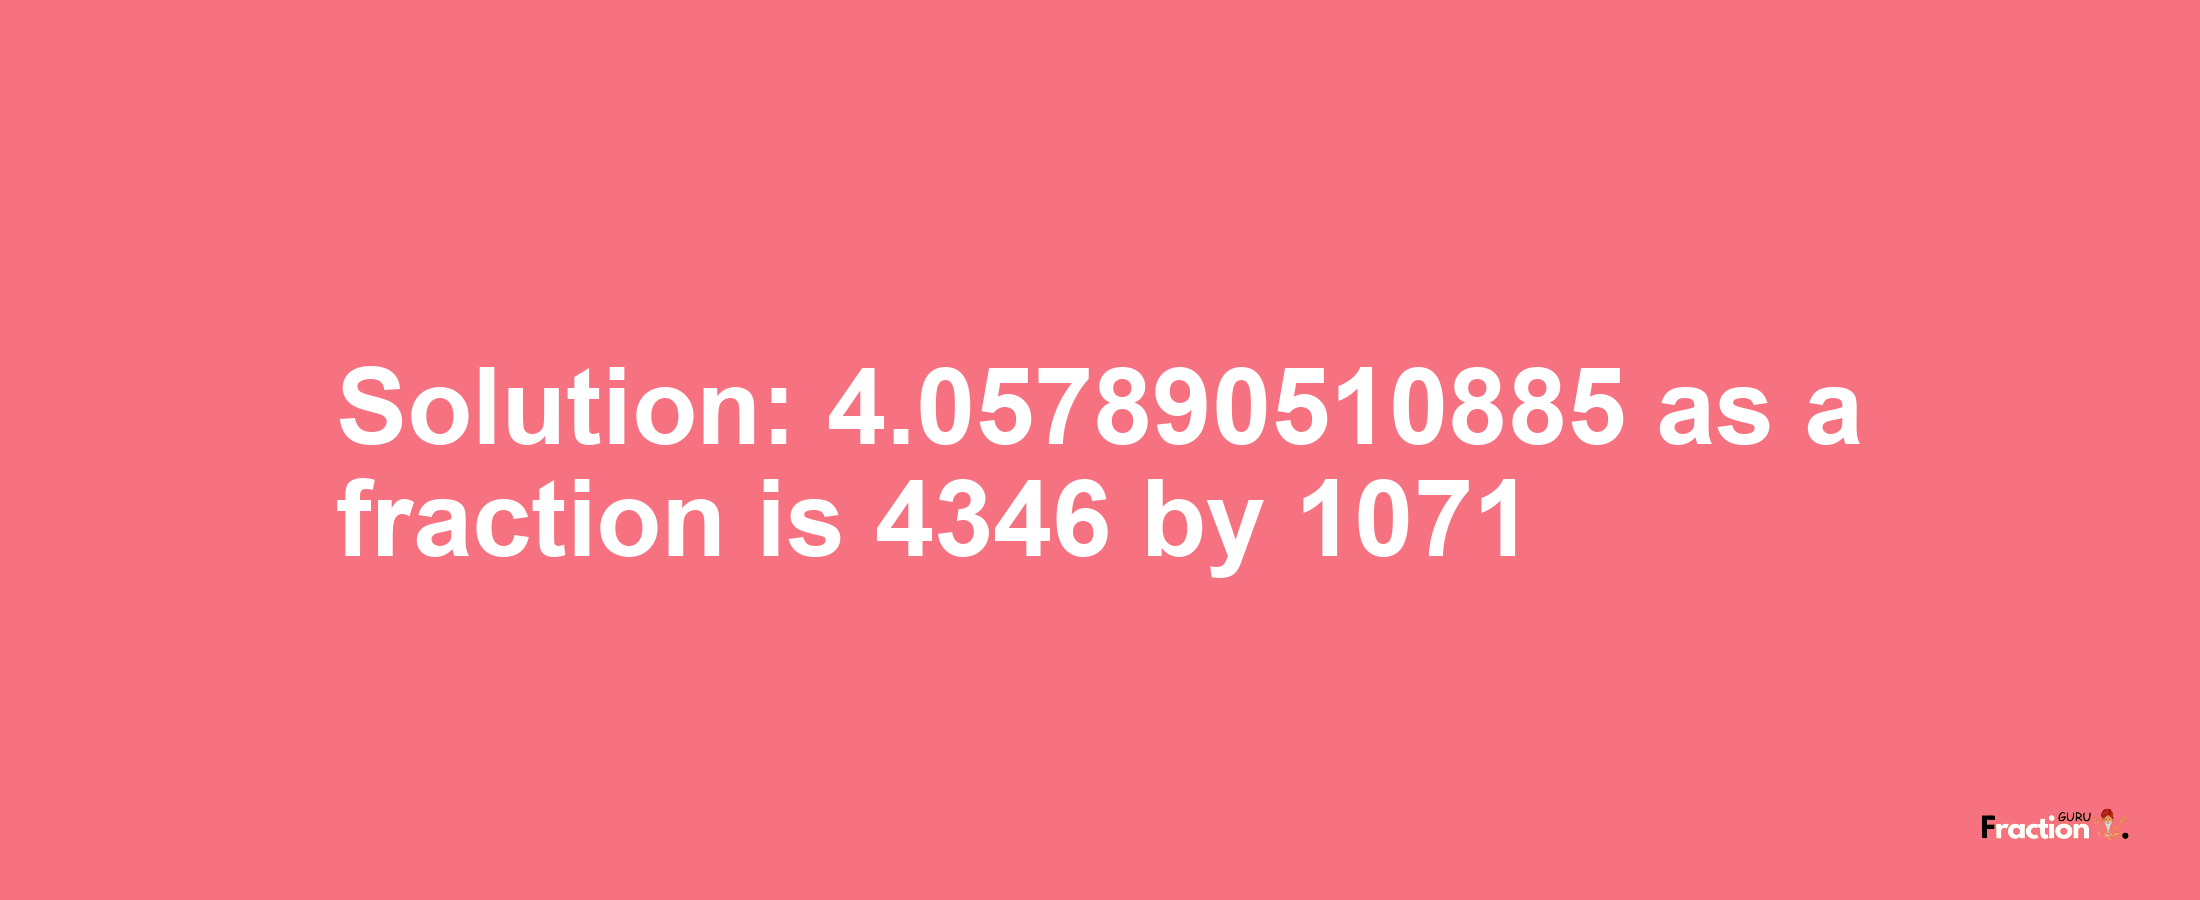 Solution:4.057890510885 as a fraction is 4346/1071